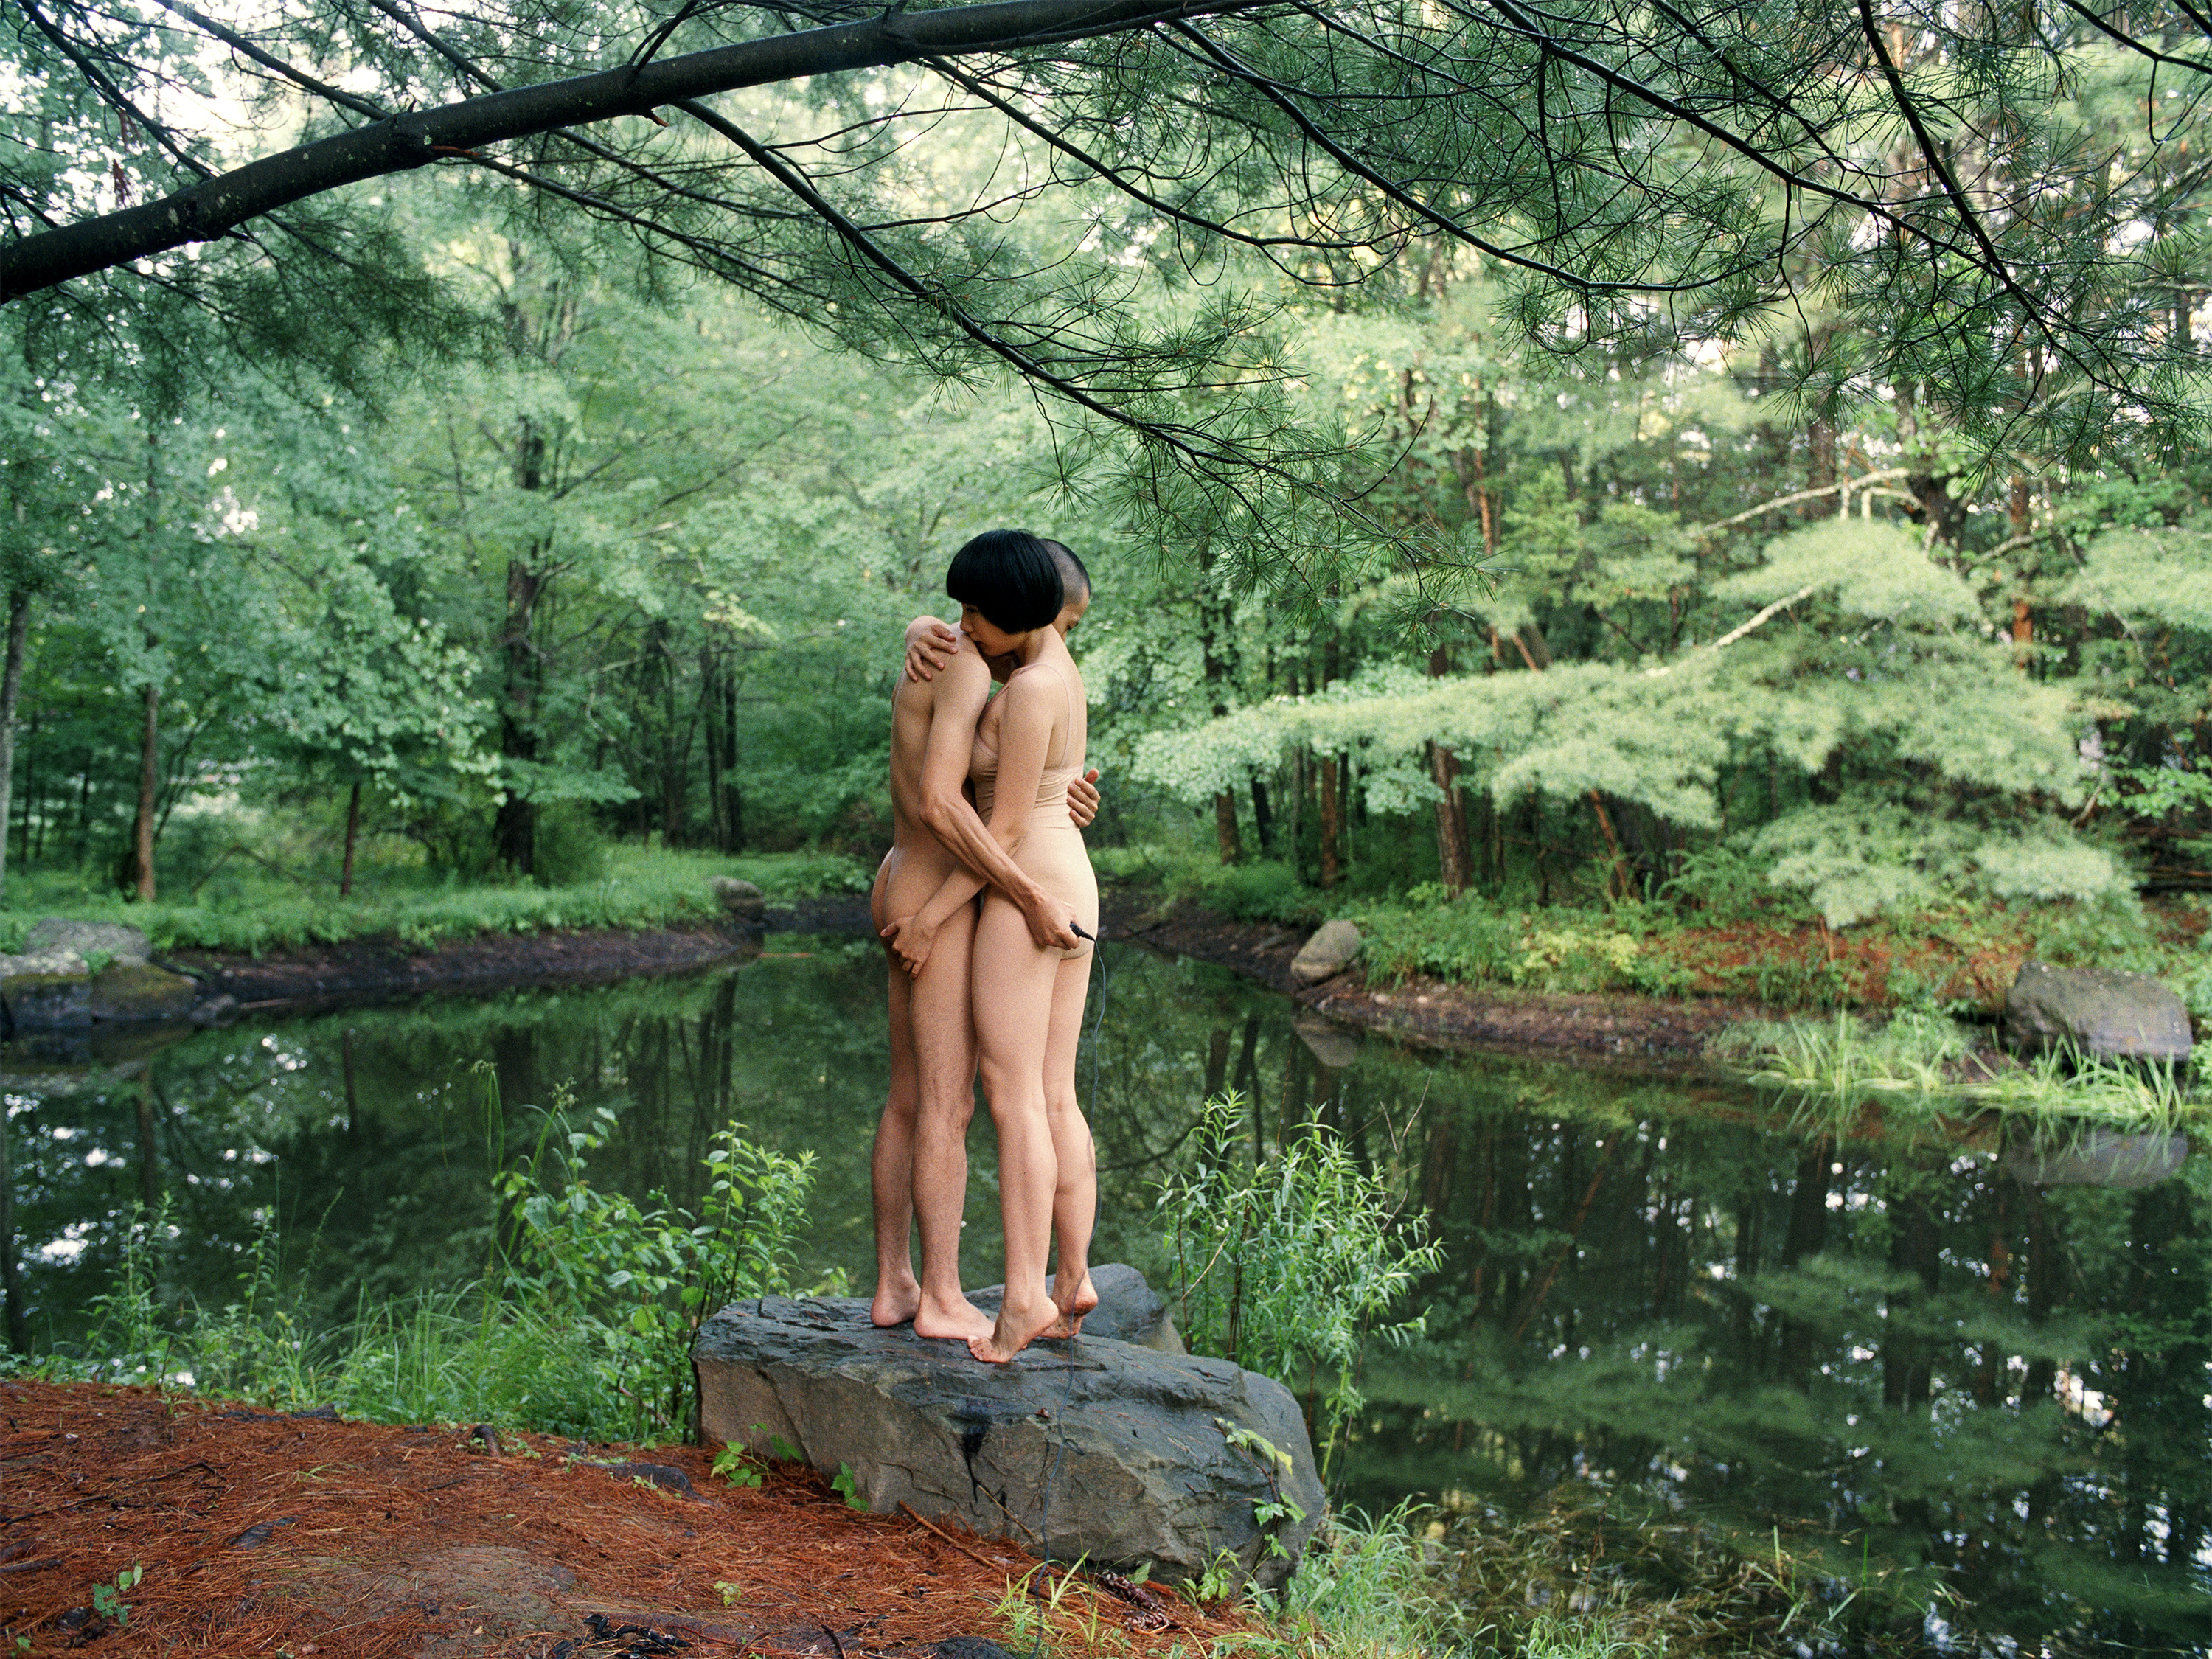 Pixy Liao, a Chinese woman with short black hair, and Moro, a Japanese man with a shaved head, hug naked by a forest green pond